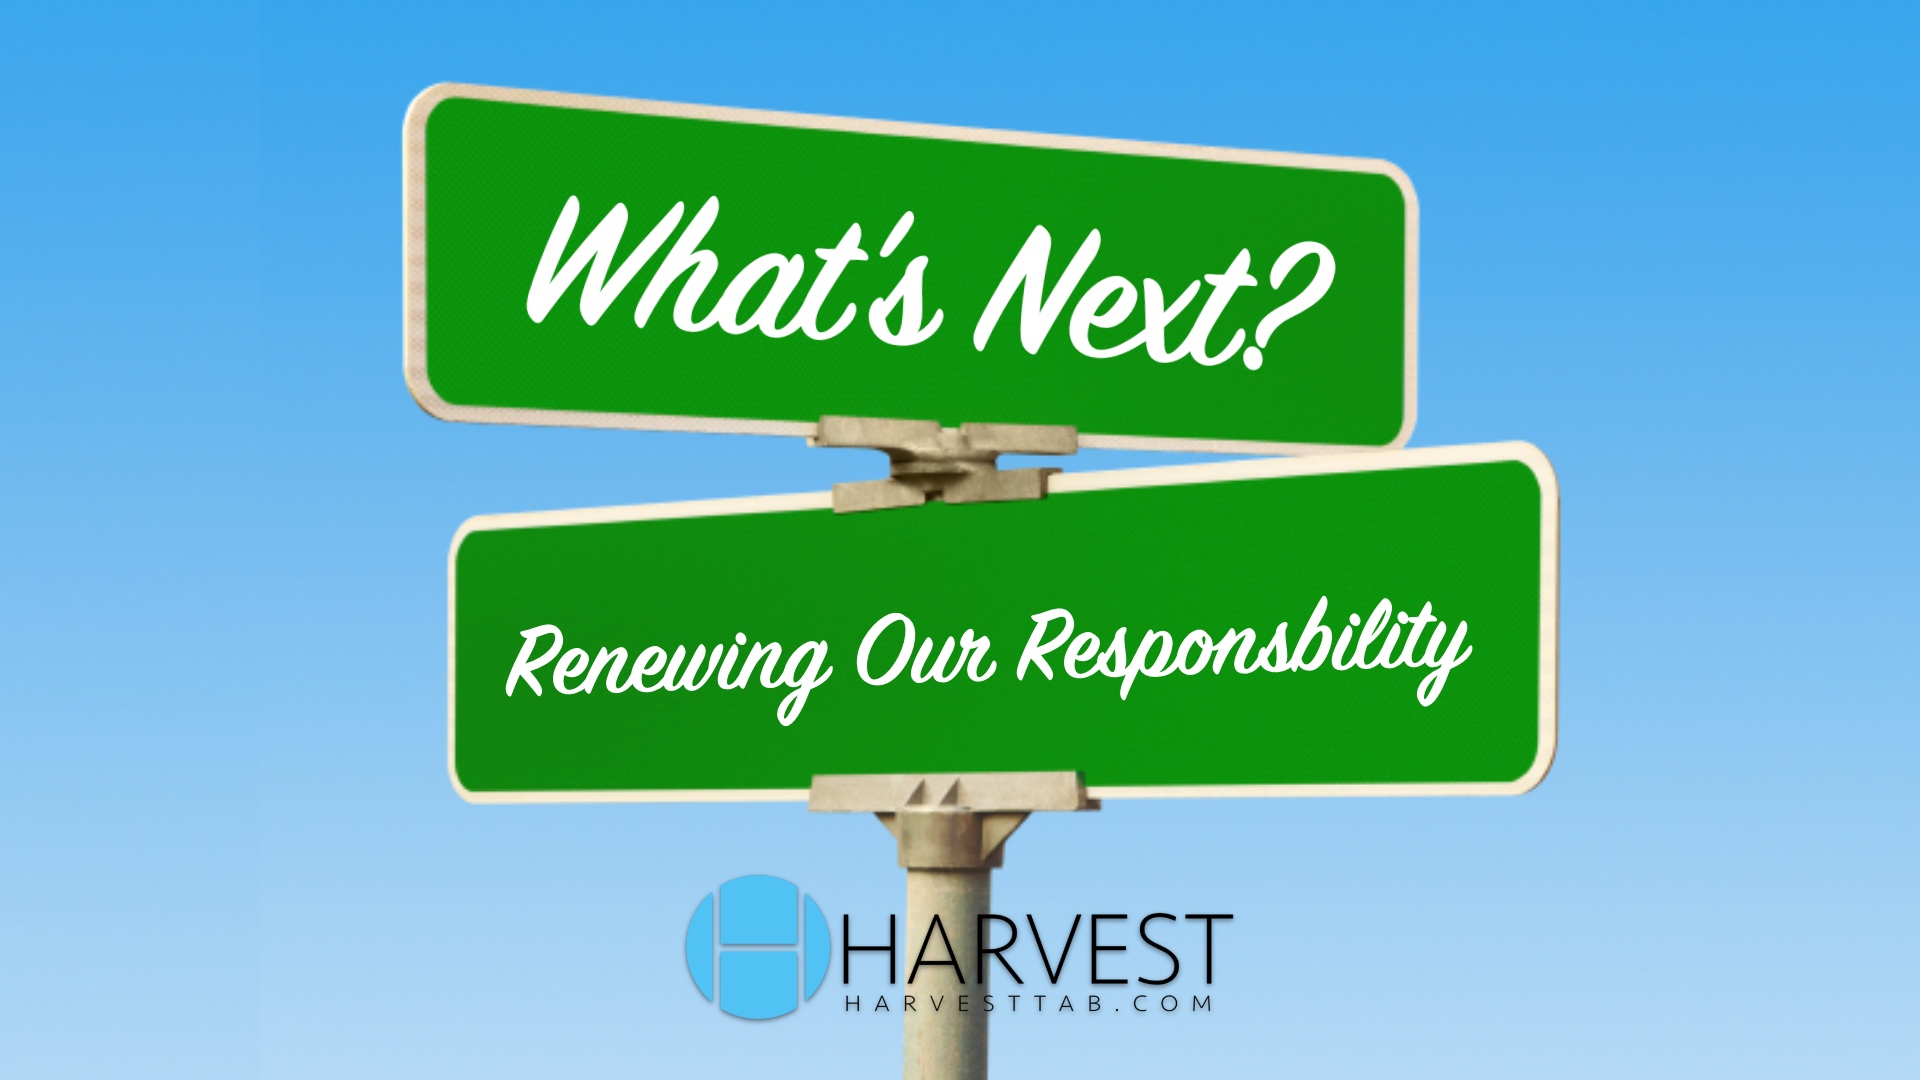 What’s Next? Renewing Our Responsibility